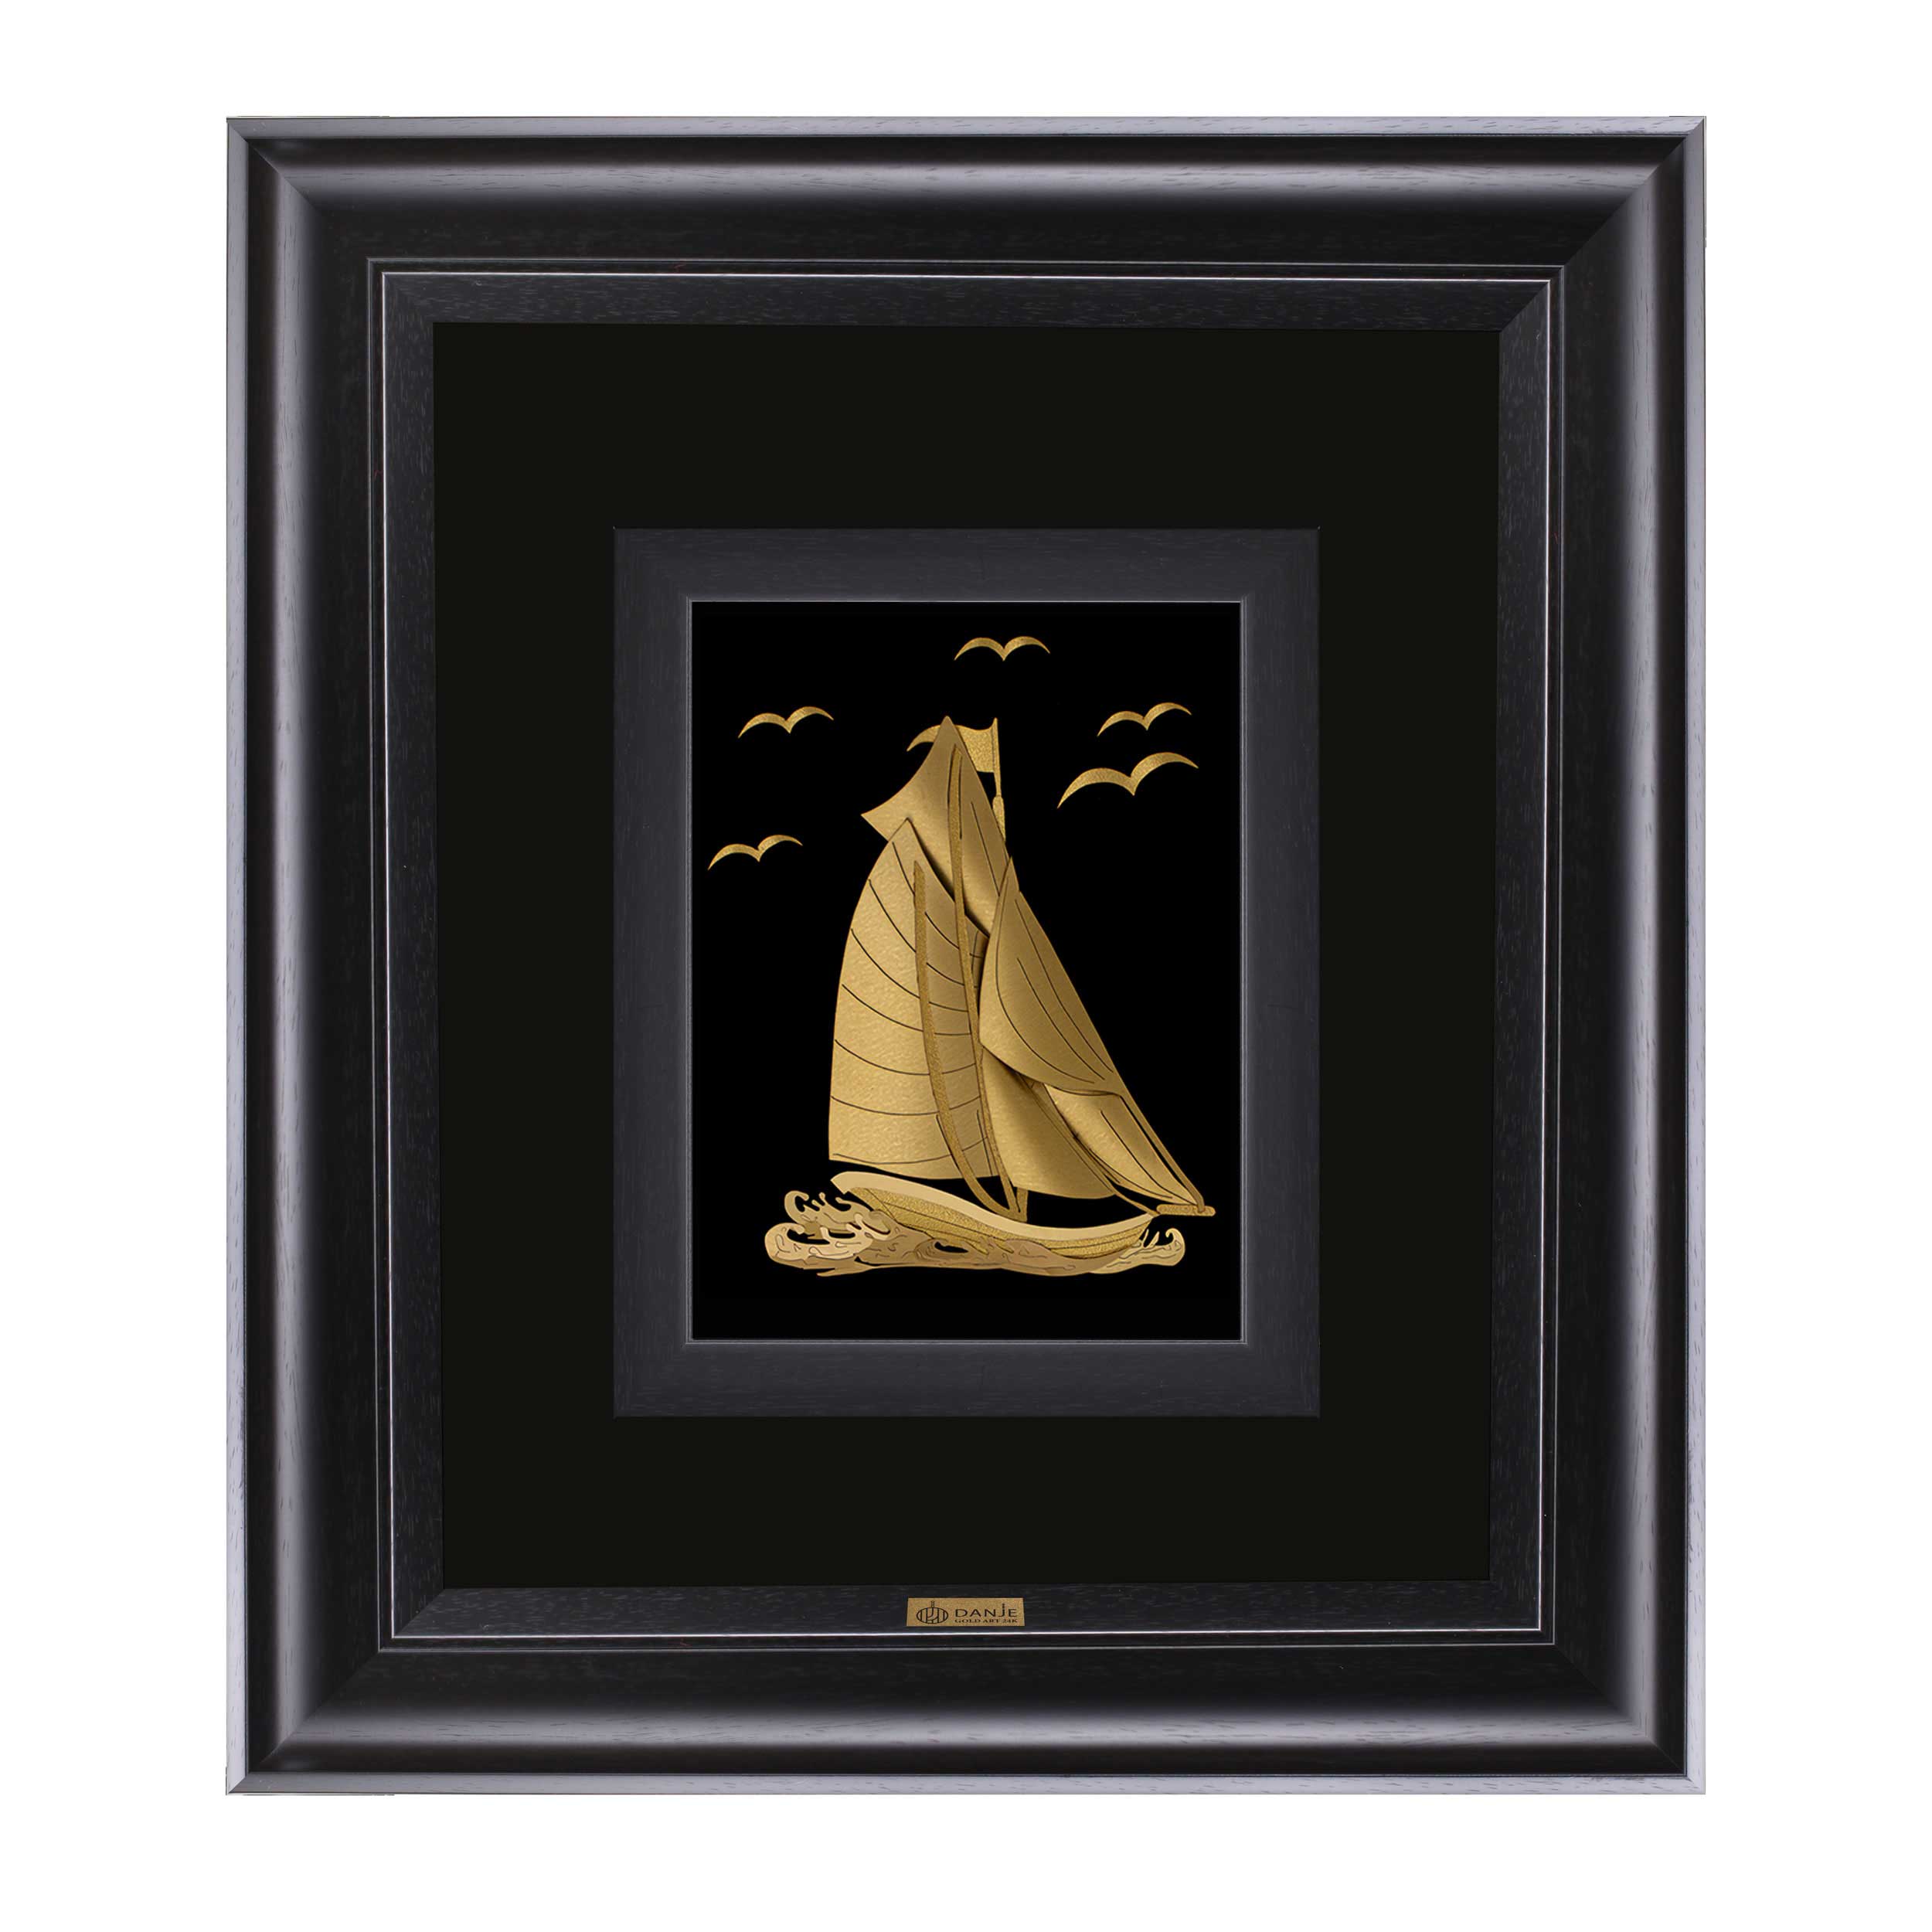 24 carat gold leaf board with PVC frame, double sail boat design, Danjeh brand